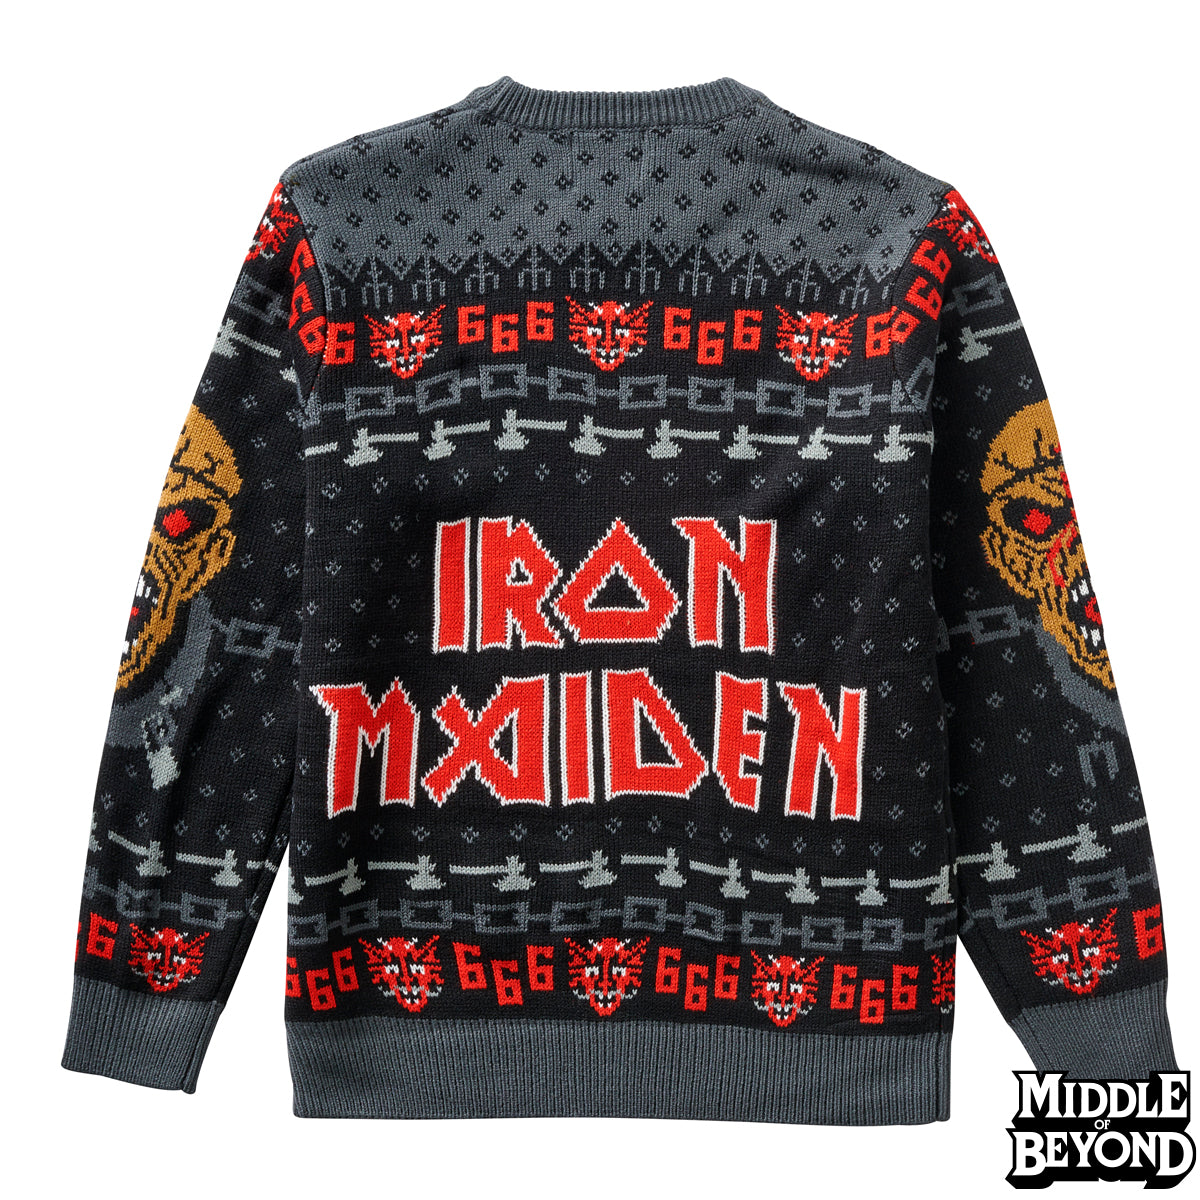 Iron Maiden Sweater – Middle of Beyond